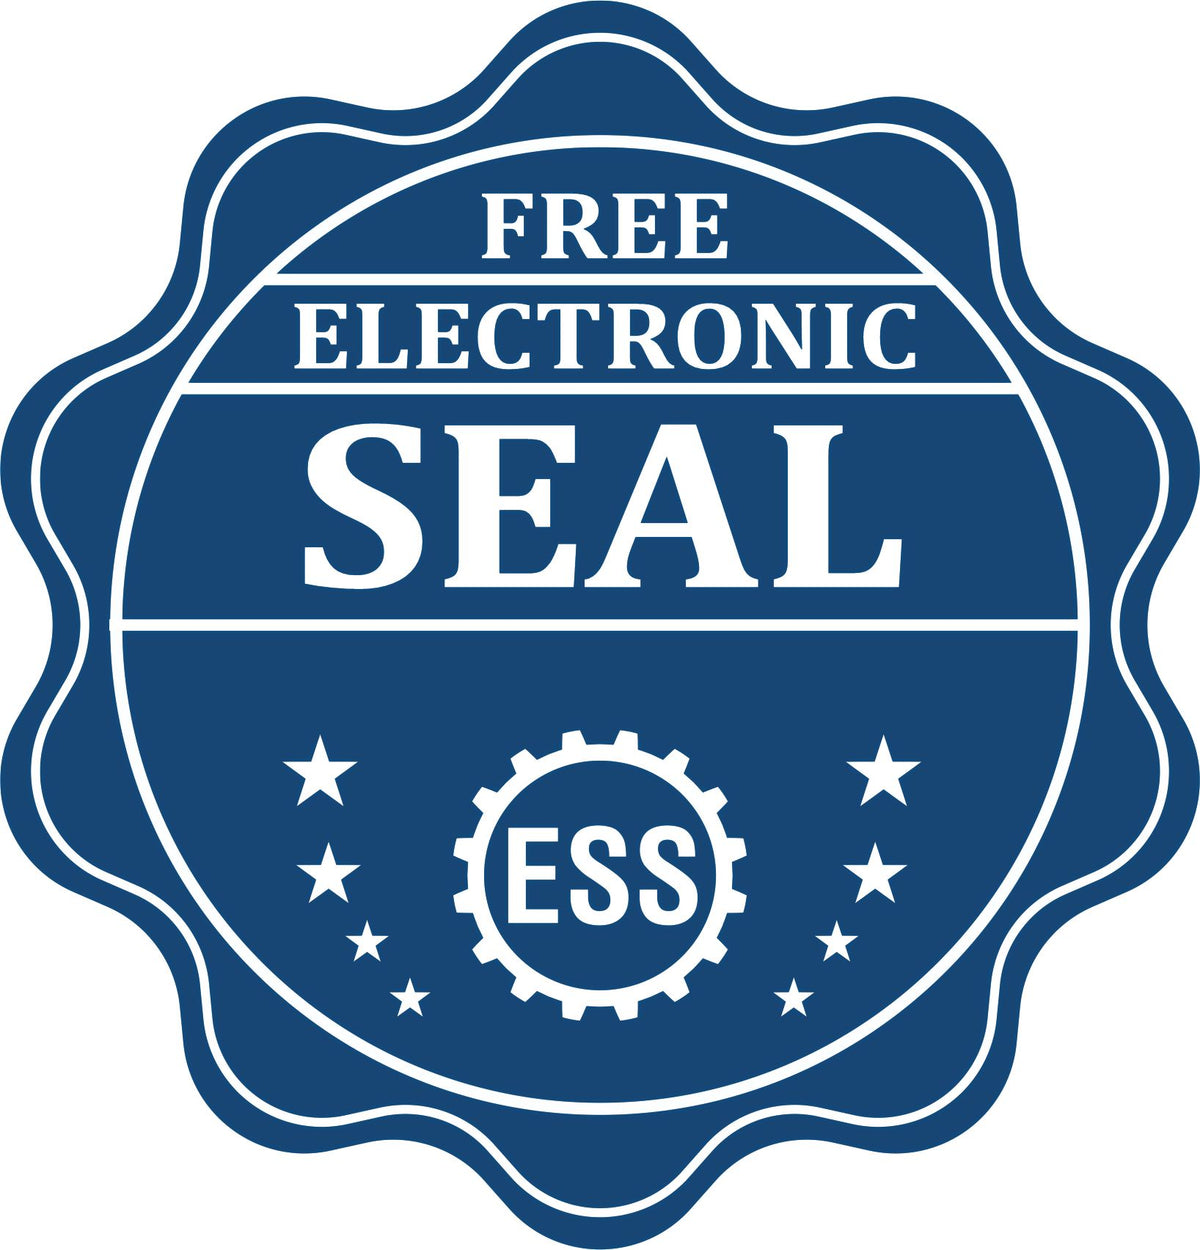 A badge showing a free electronic seal for the Gift West Virginia Engineer Seal with stars and the ESS gear on the emblem.